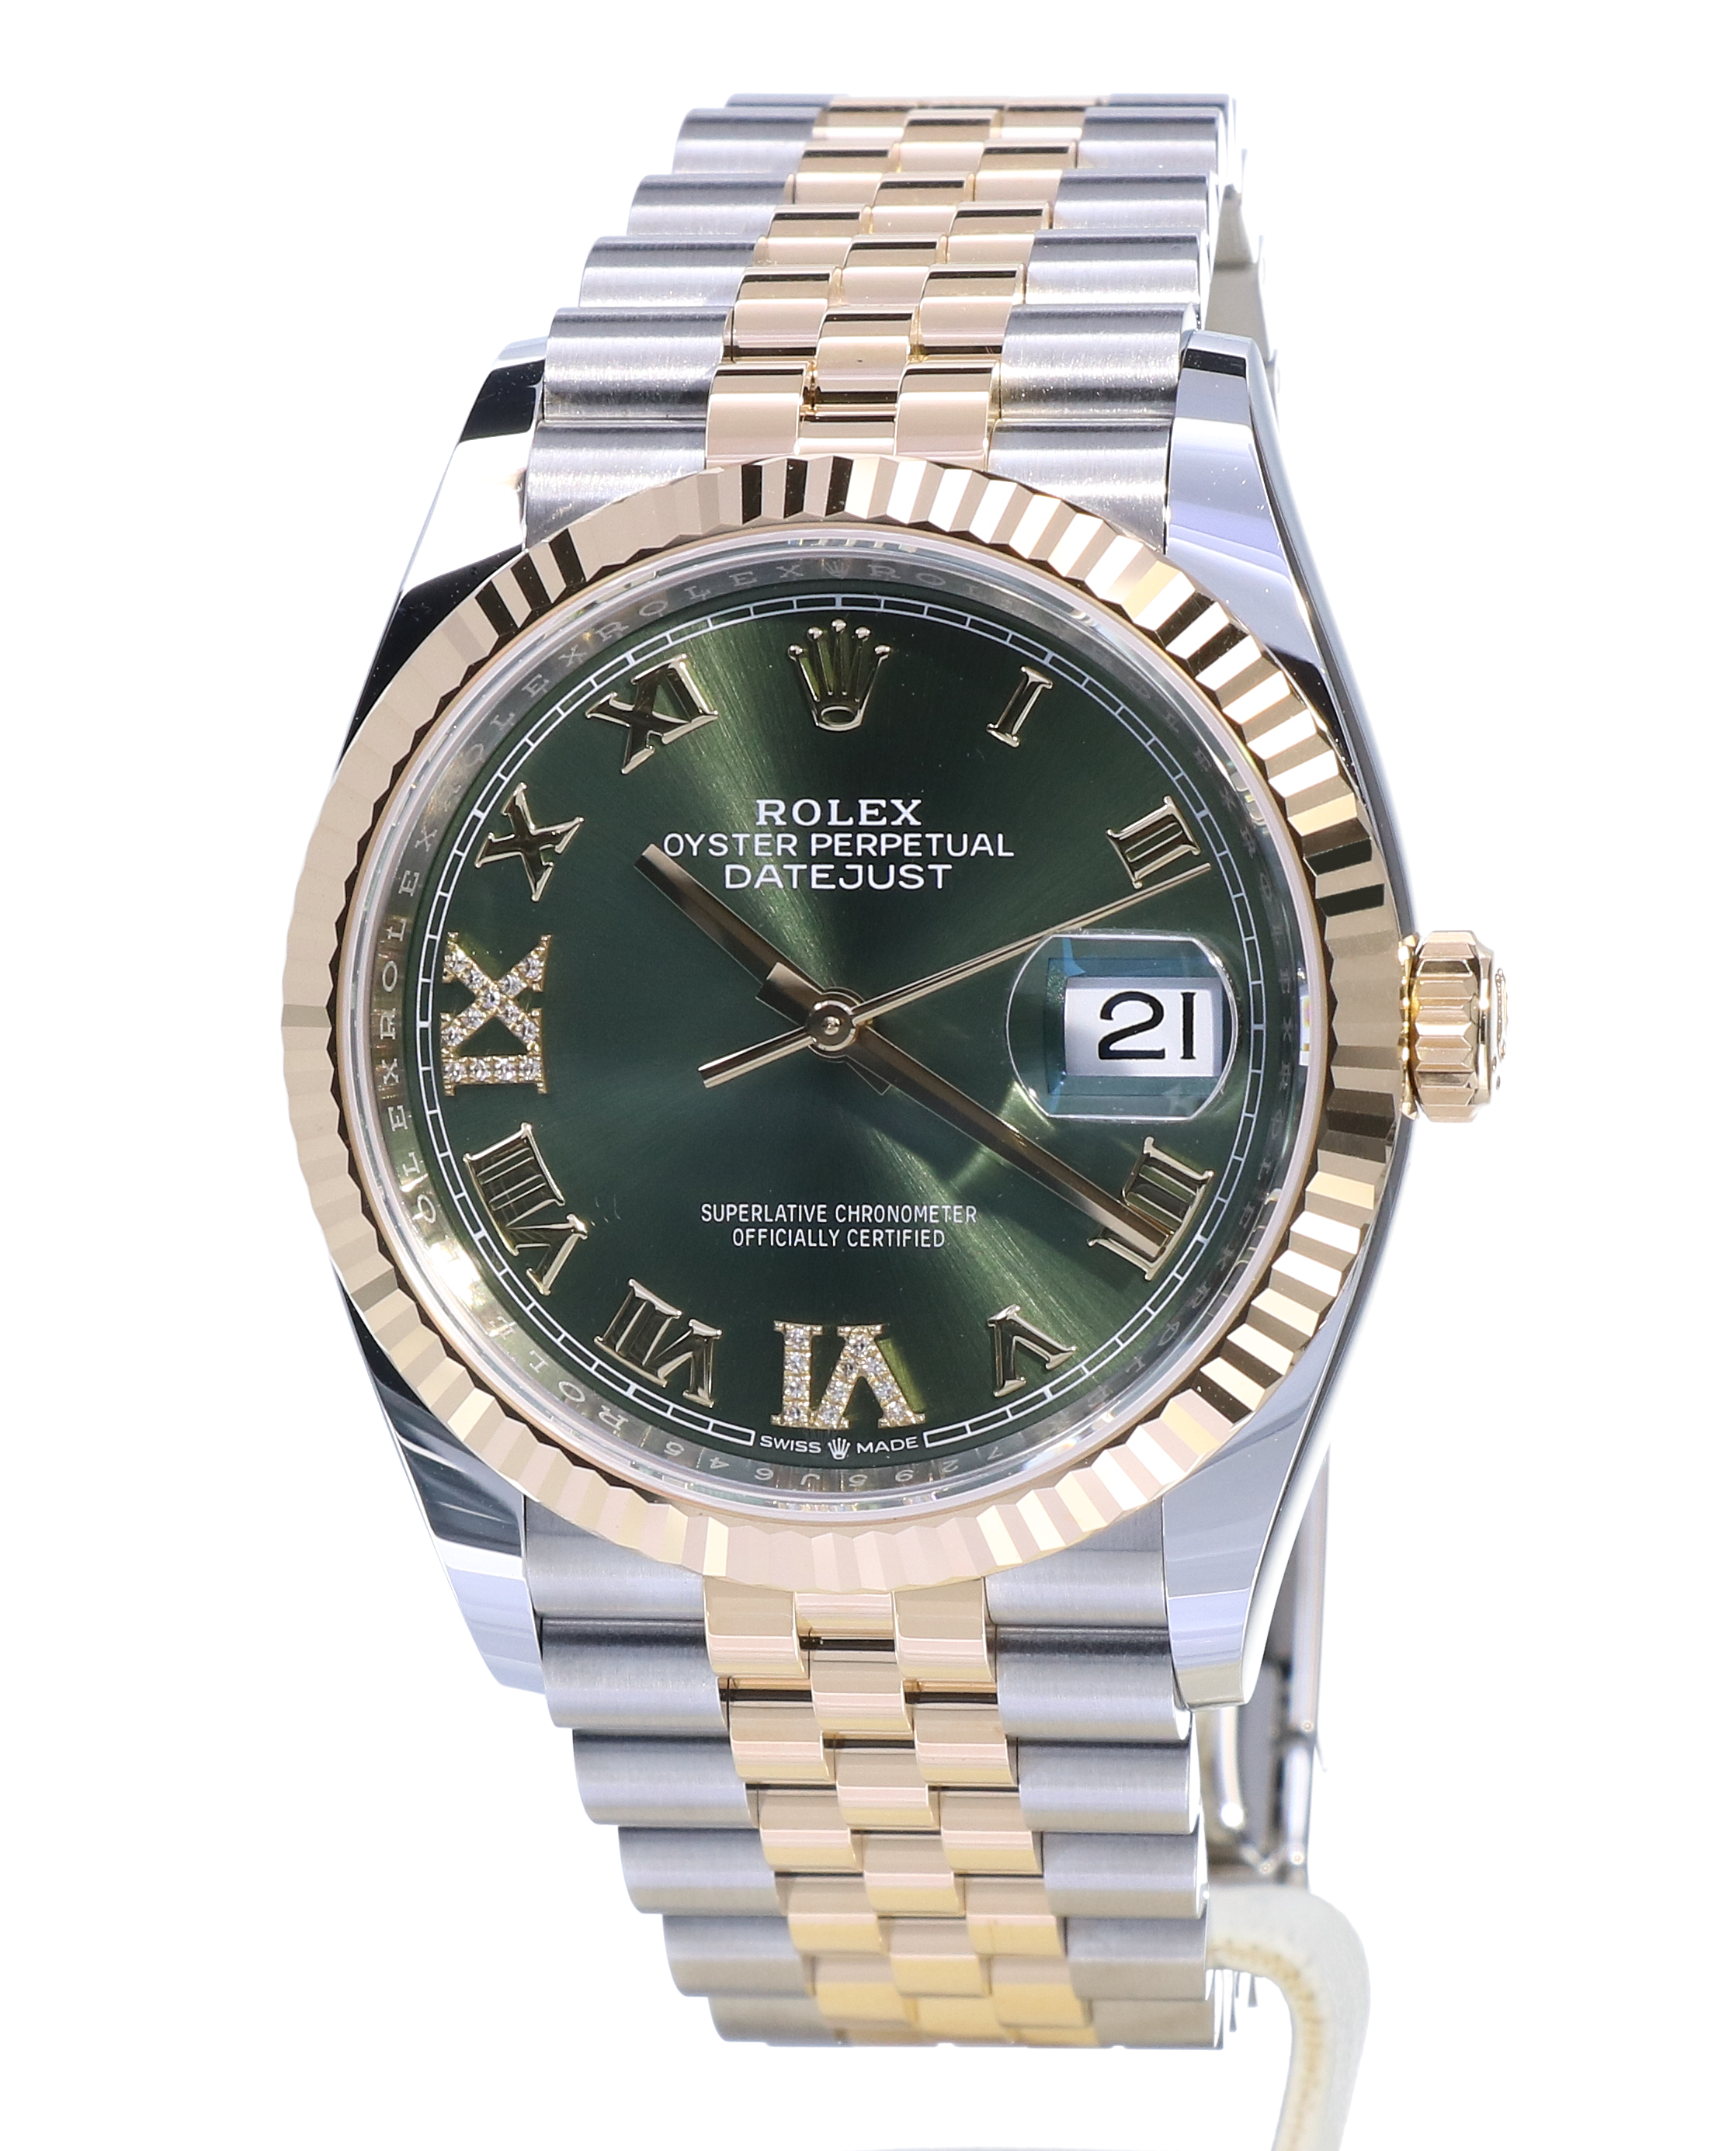 datejust 36 gold and steel